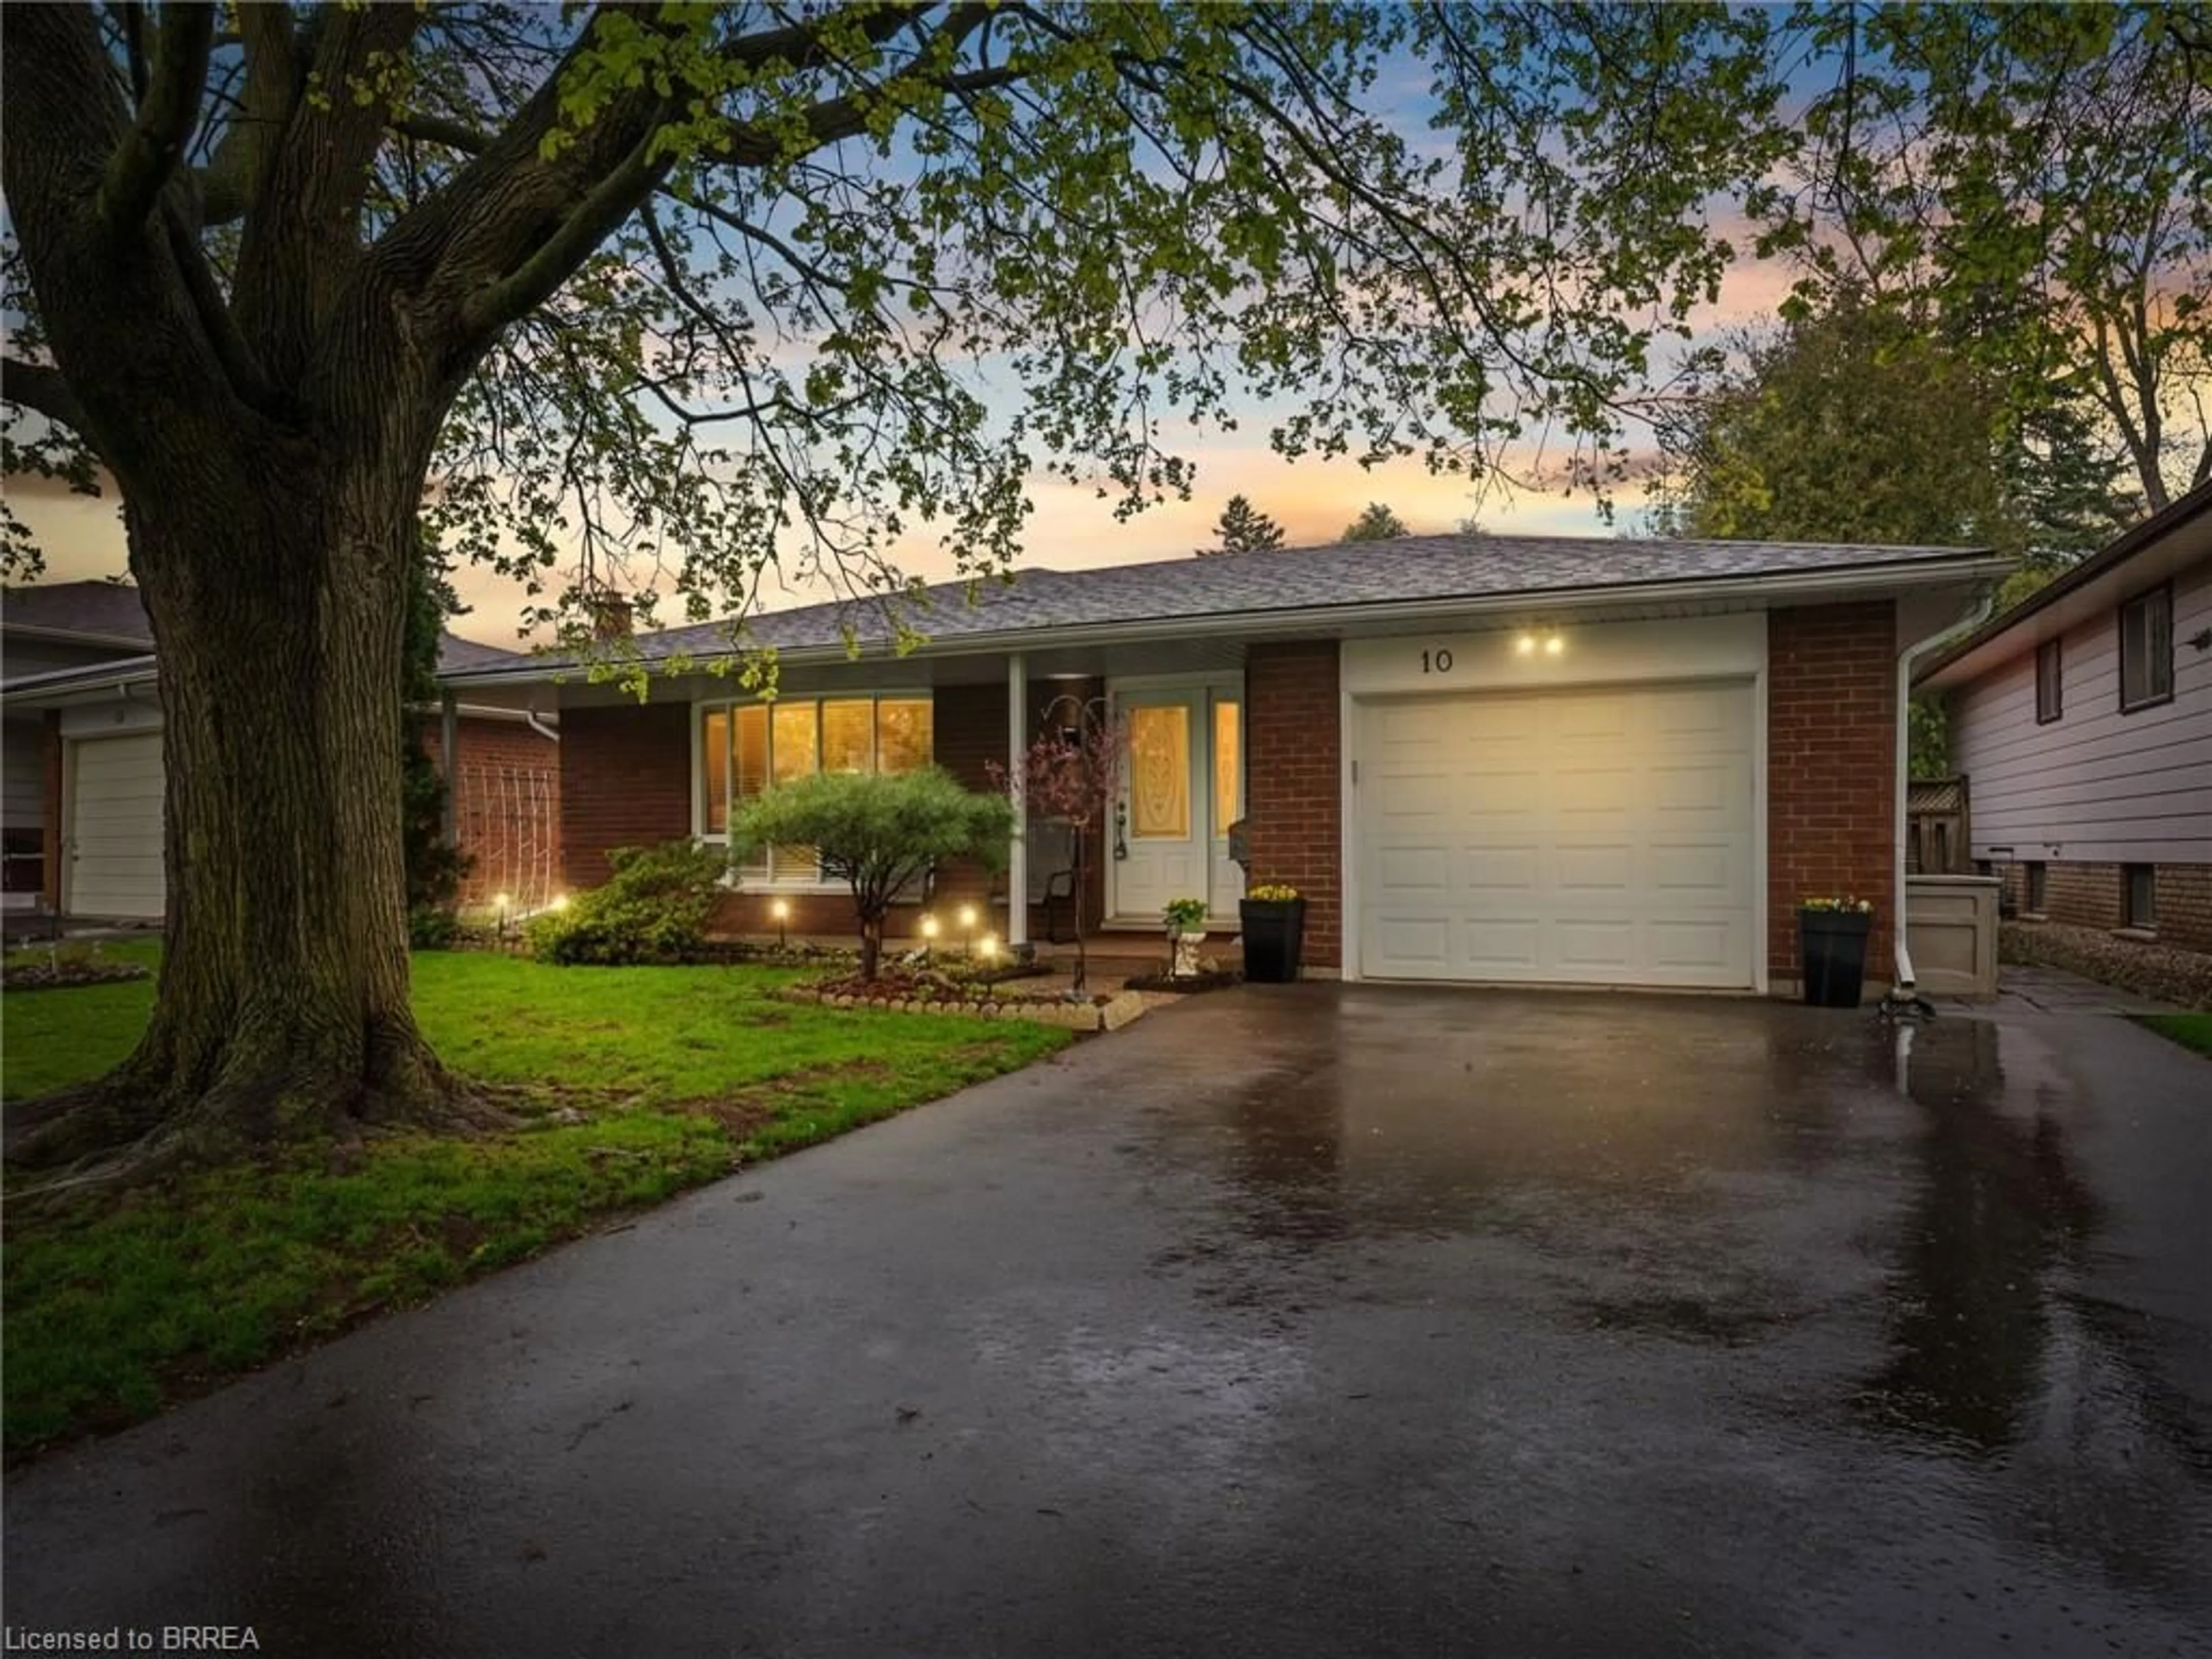 Home with brick exterior material for 10 Wedgewood Dr, Brantford Ontario N3R 6J3